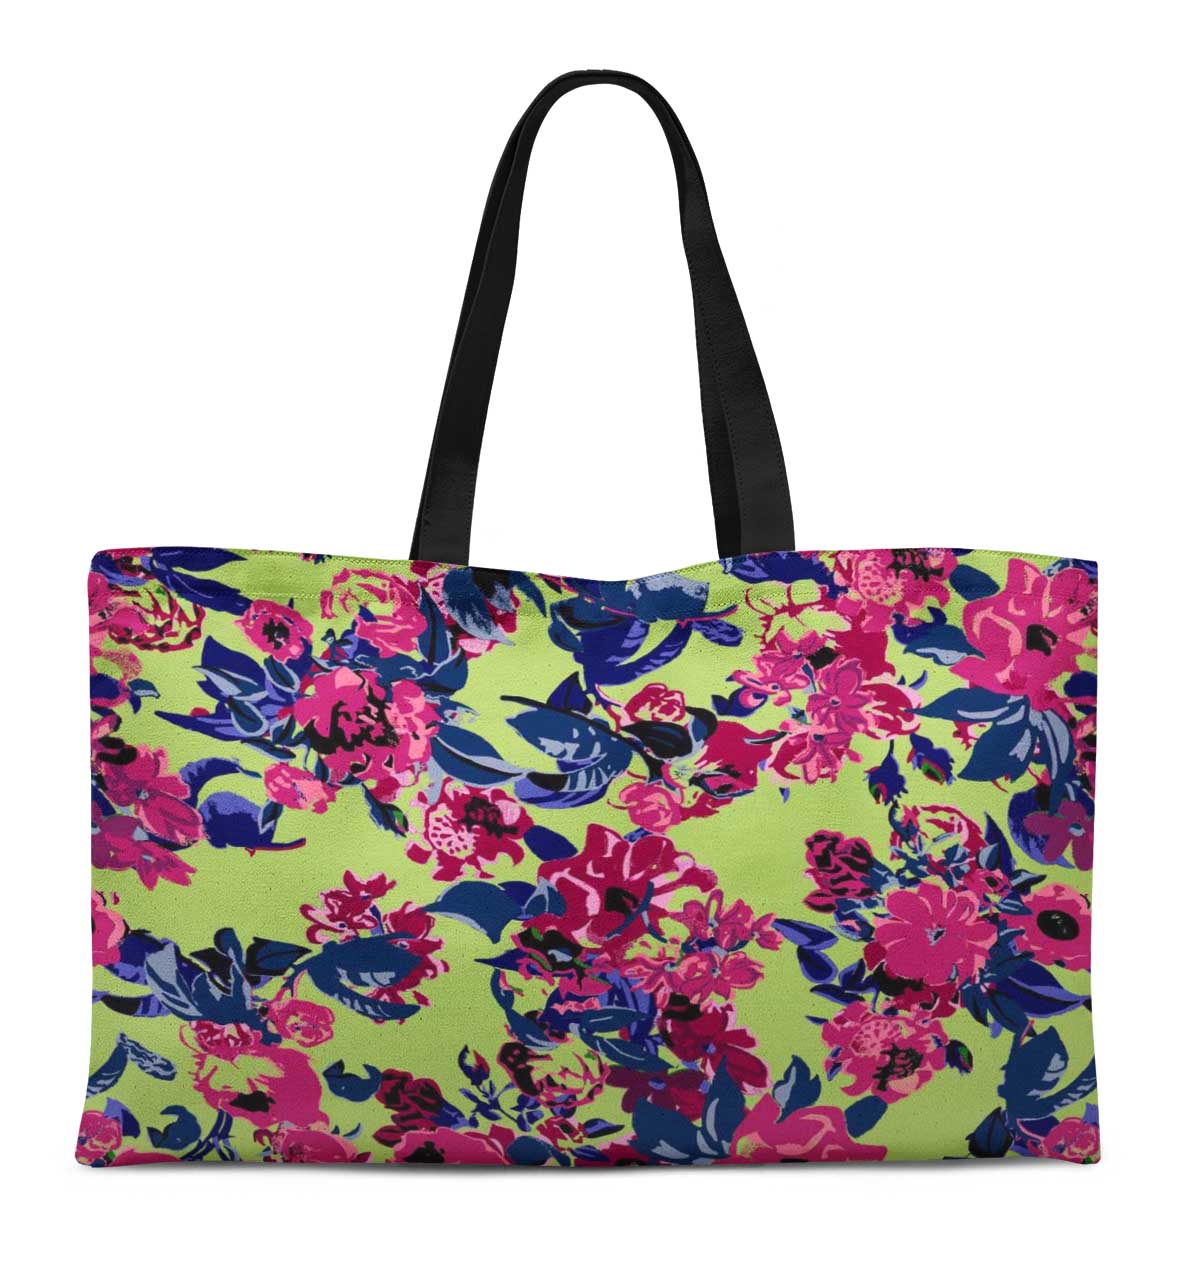 Details about  / S4Sassy Floral  Canvas Shopping Tote Bag Carrying Handbag Casual  Bag-FL-589G